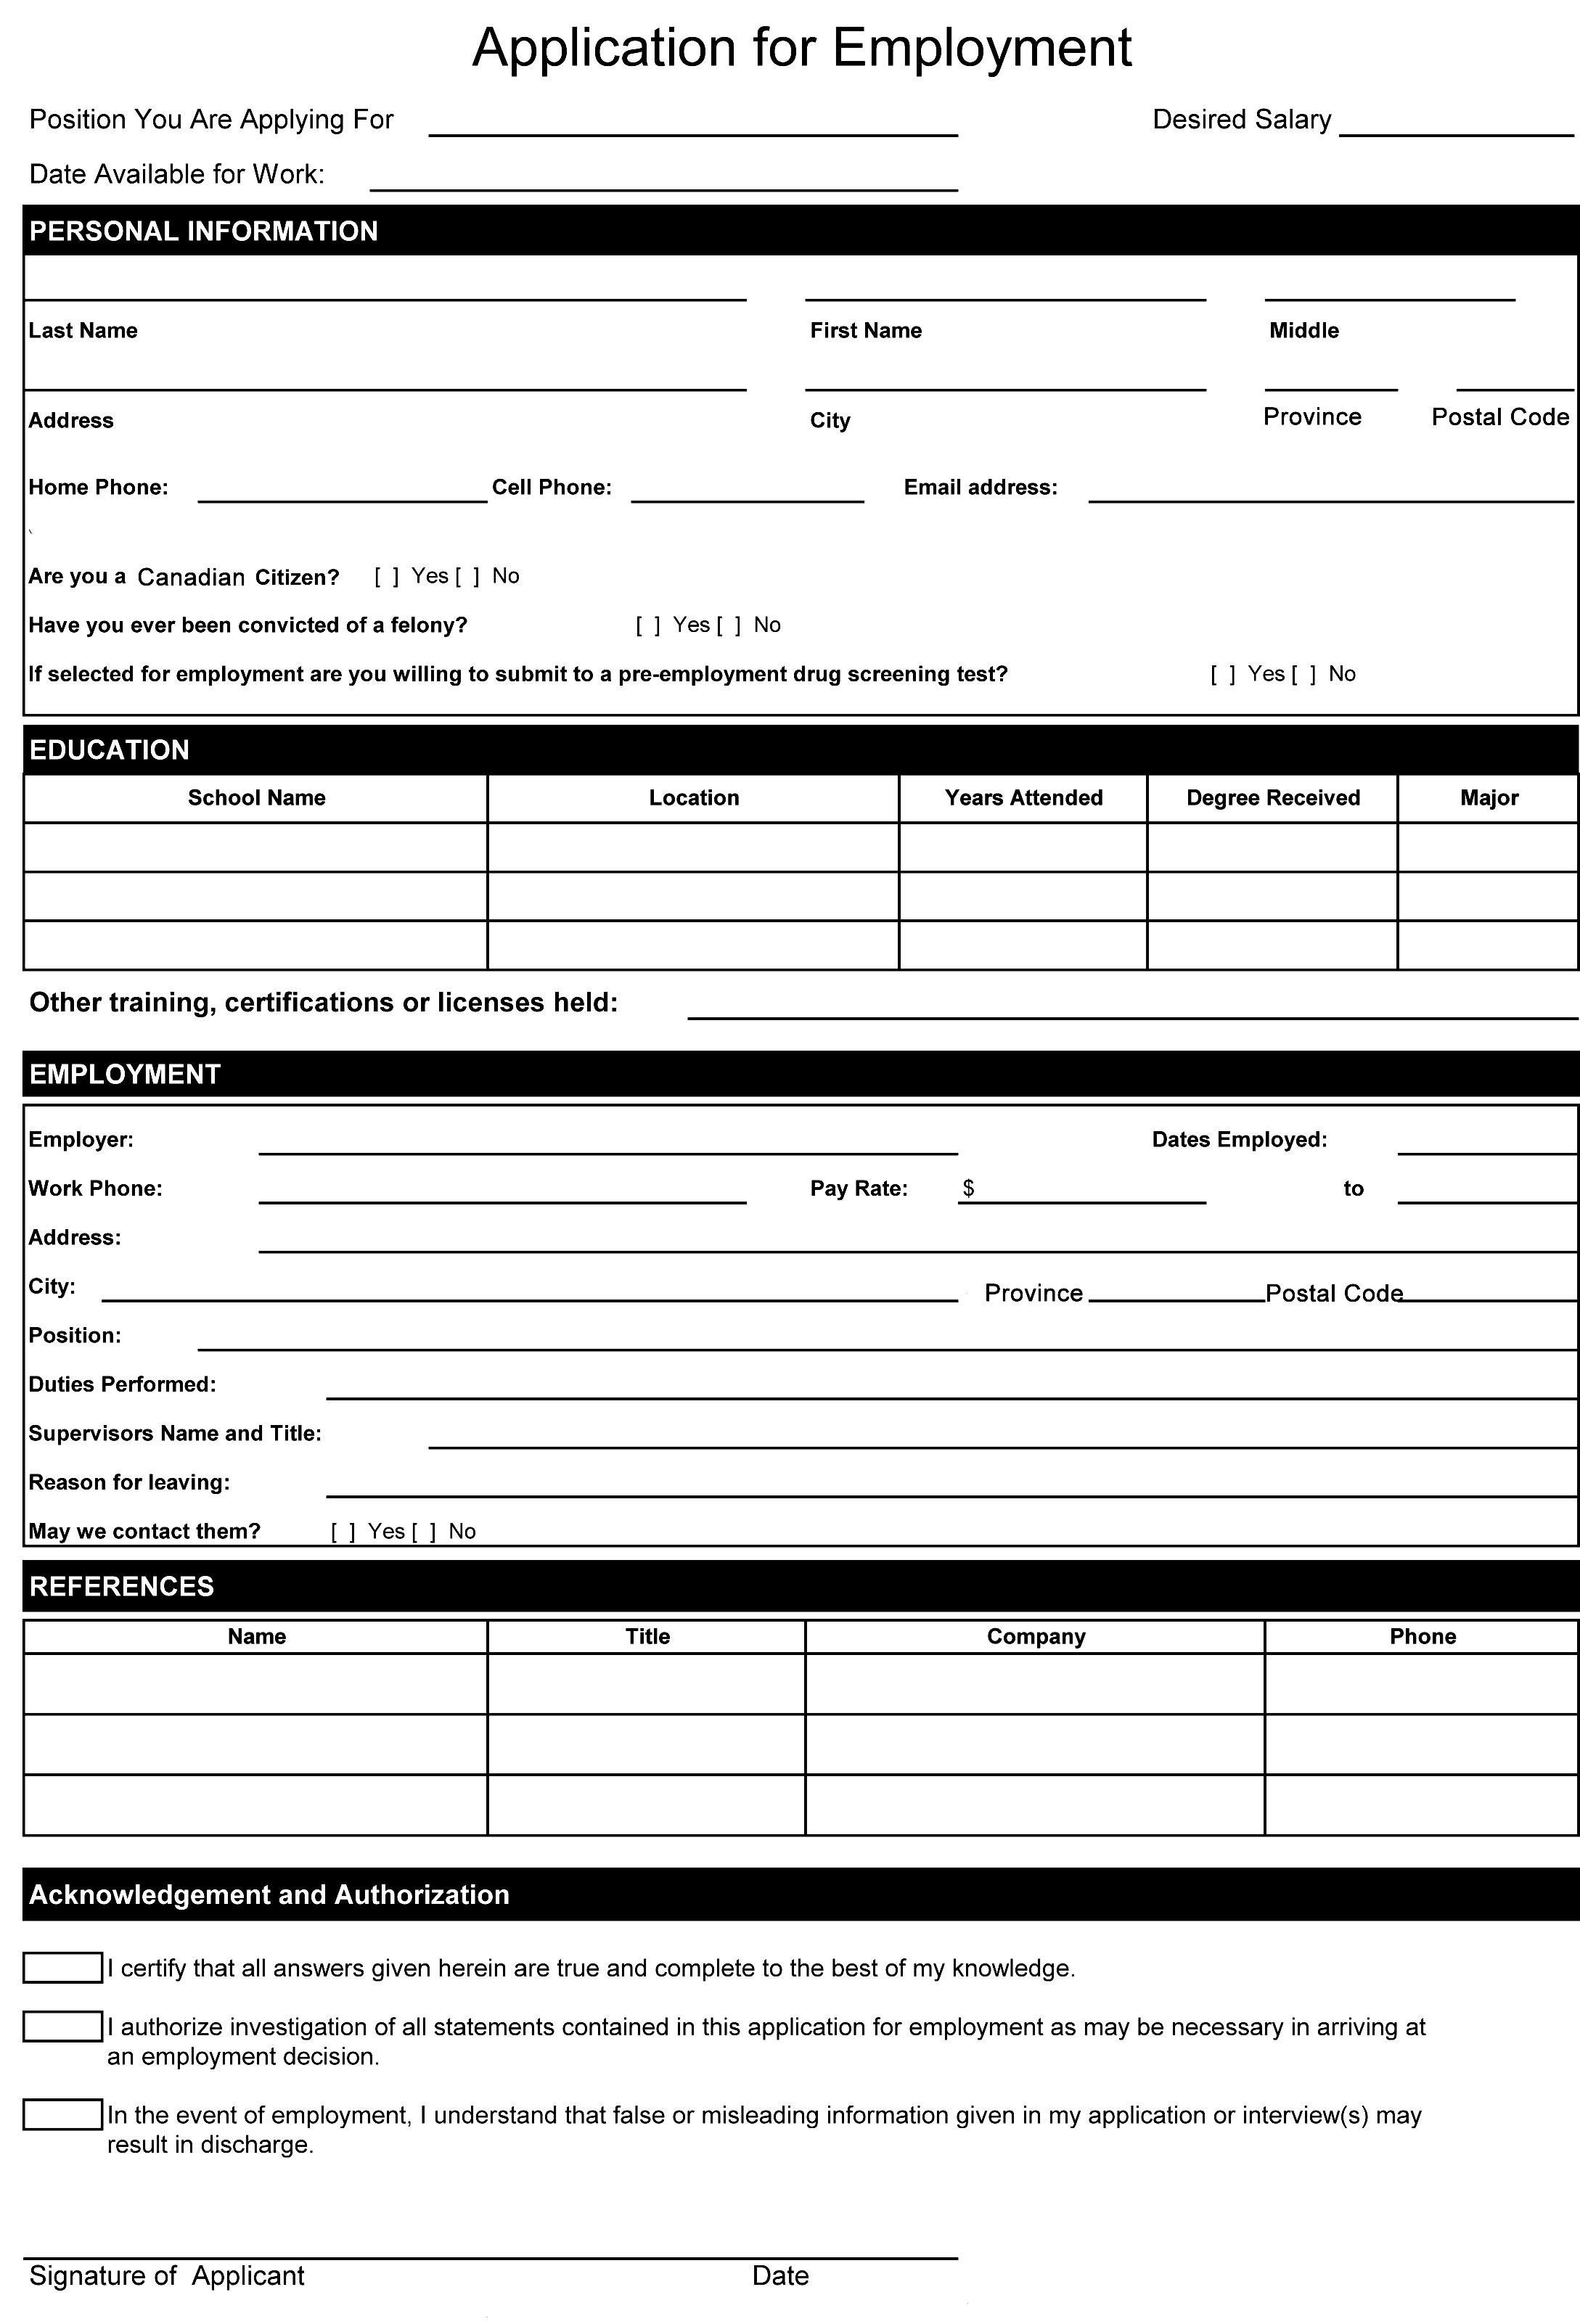 Resume Format Word Document | Resume Format | Job Application Form - Free Printable Pre Employment Tests